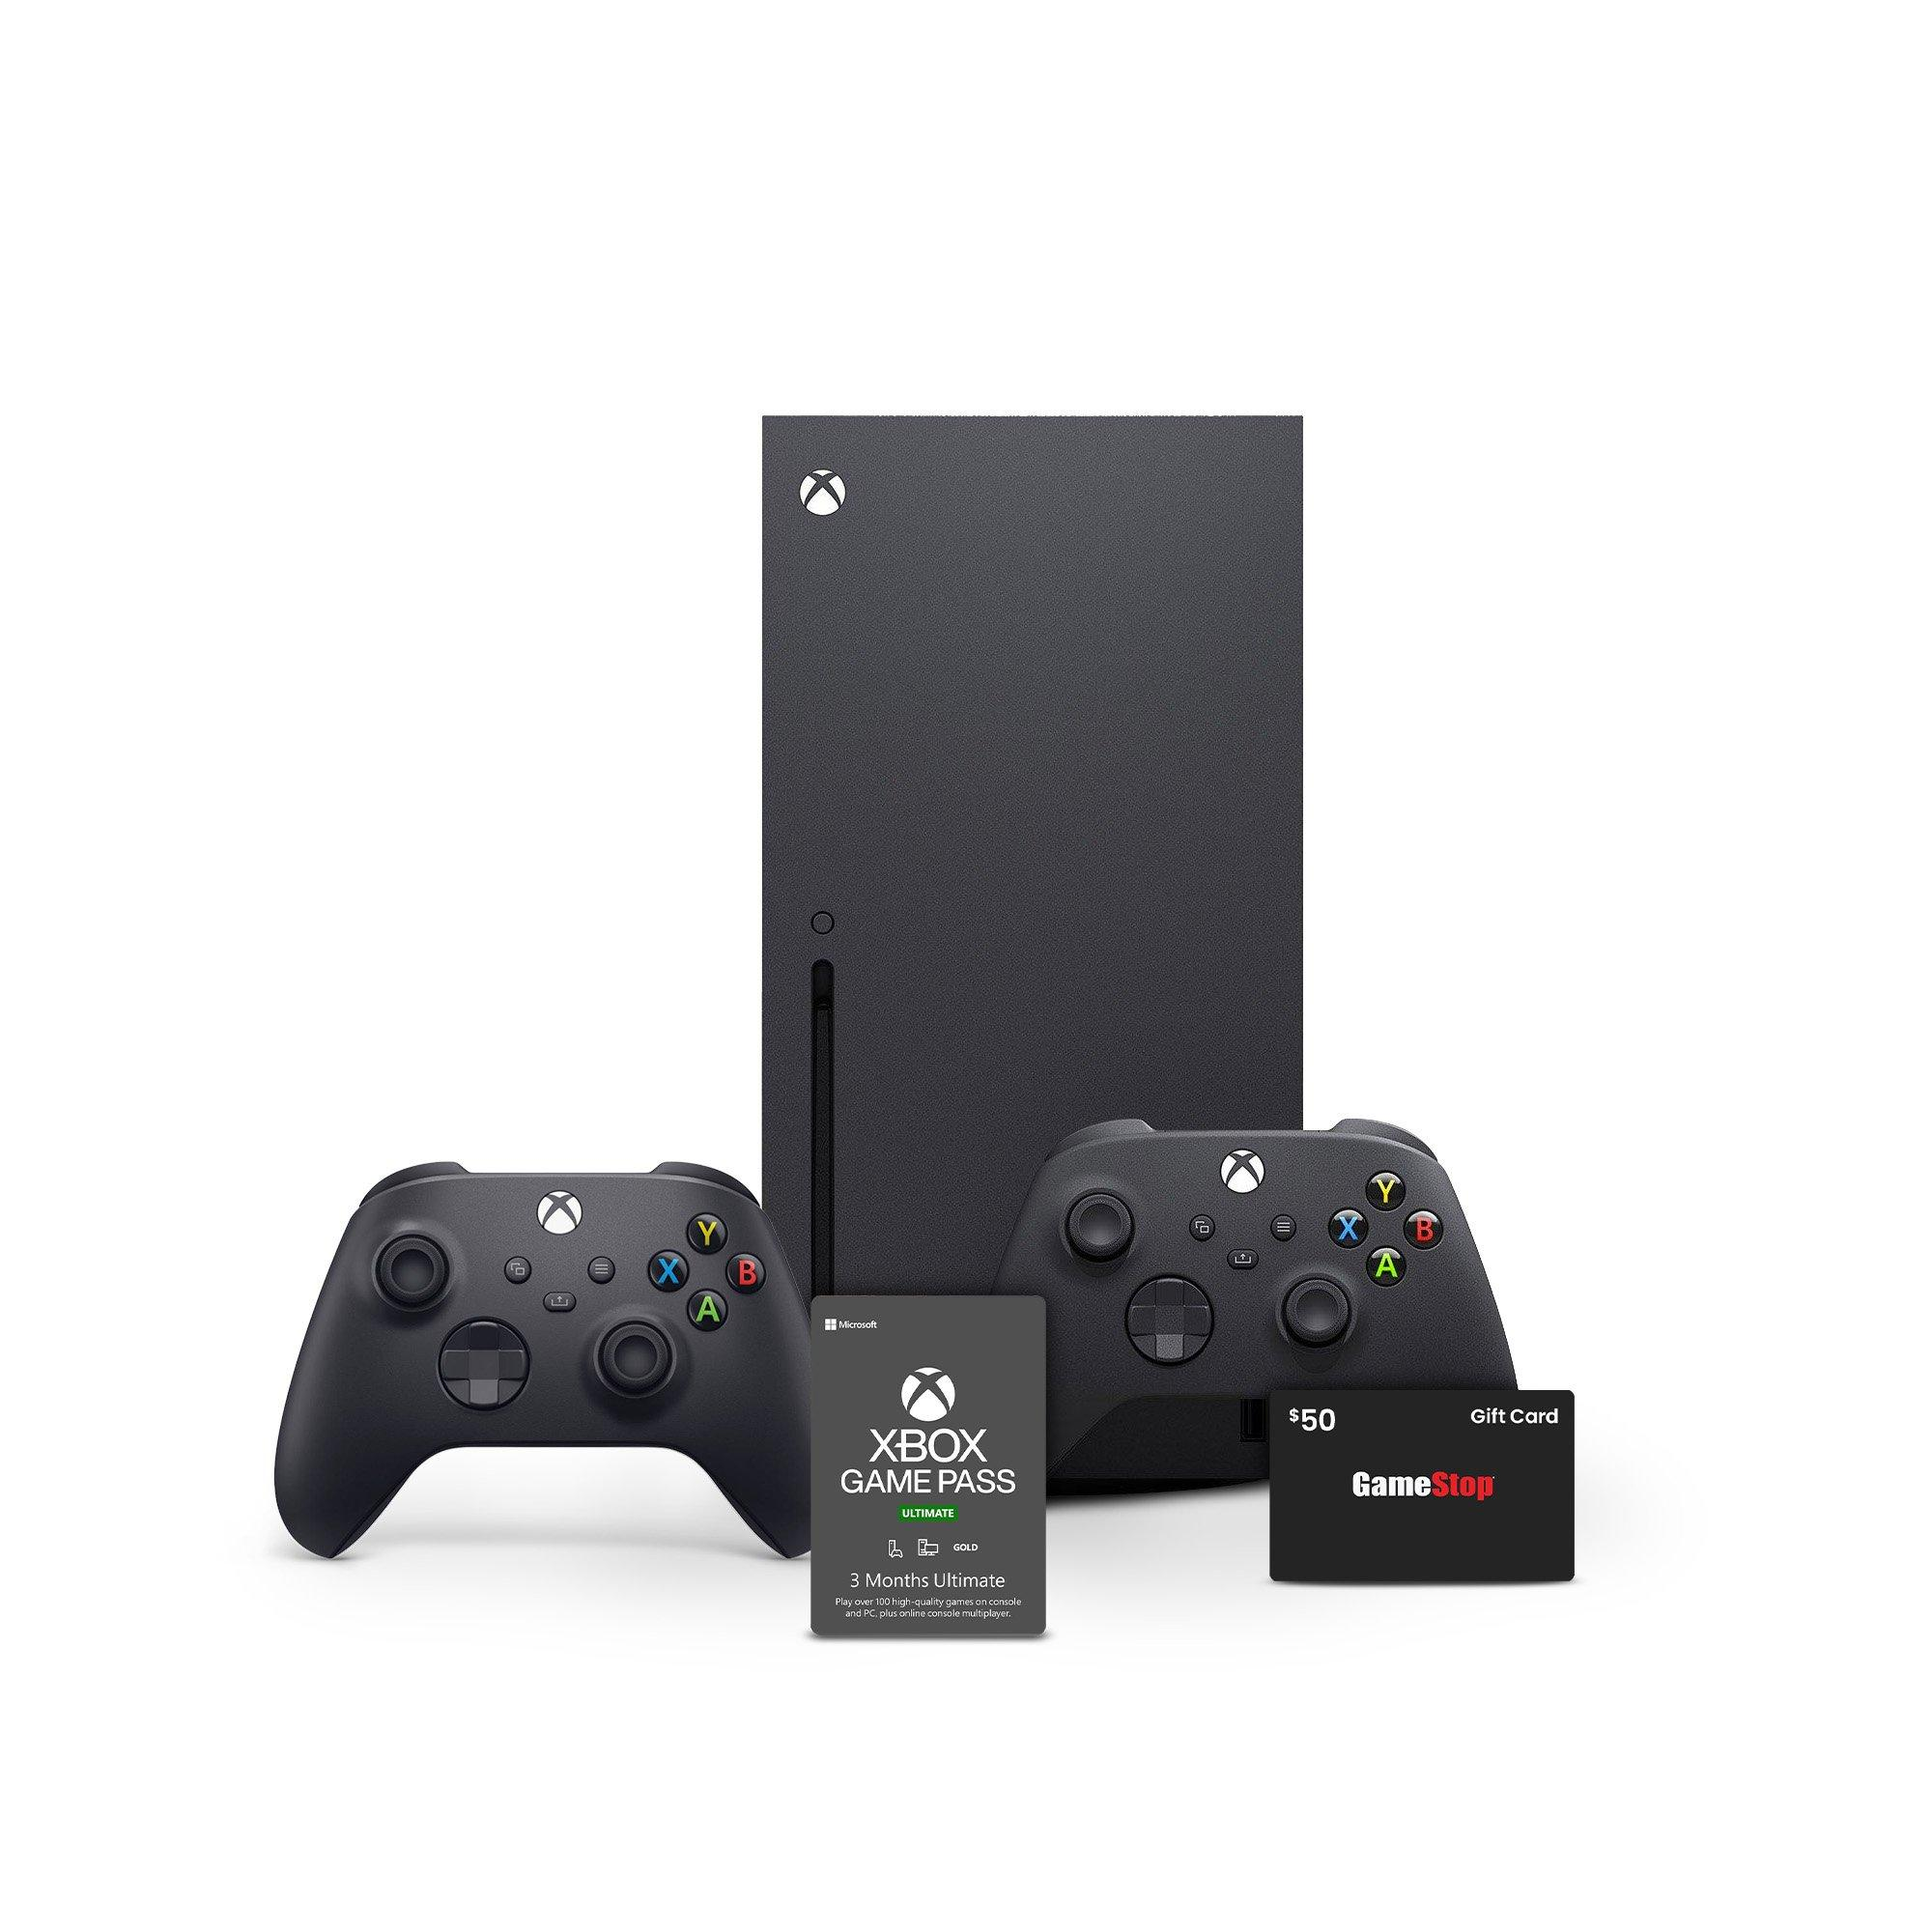 Xbox Series X, Black Controller, Game Pass Ultimate System Bundle with a $50 GameStop Gift Card $649